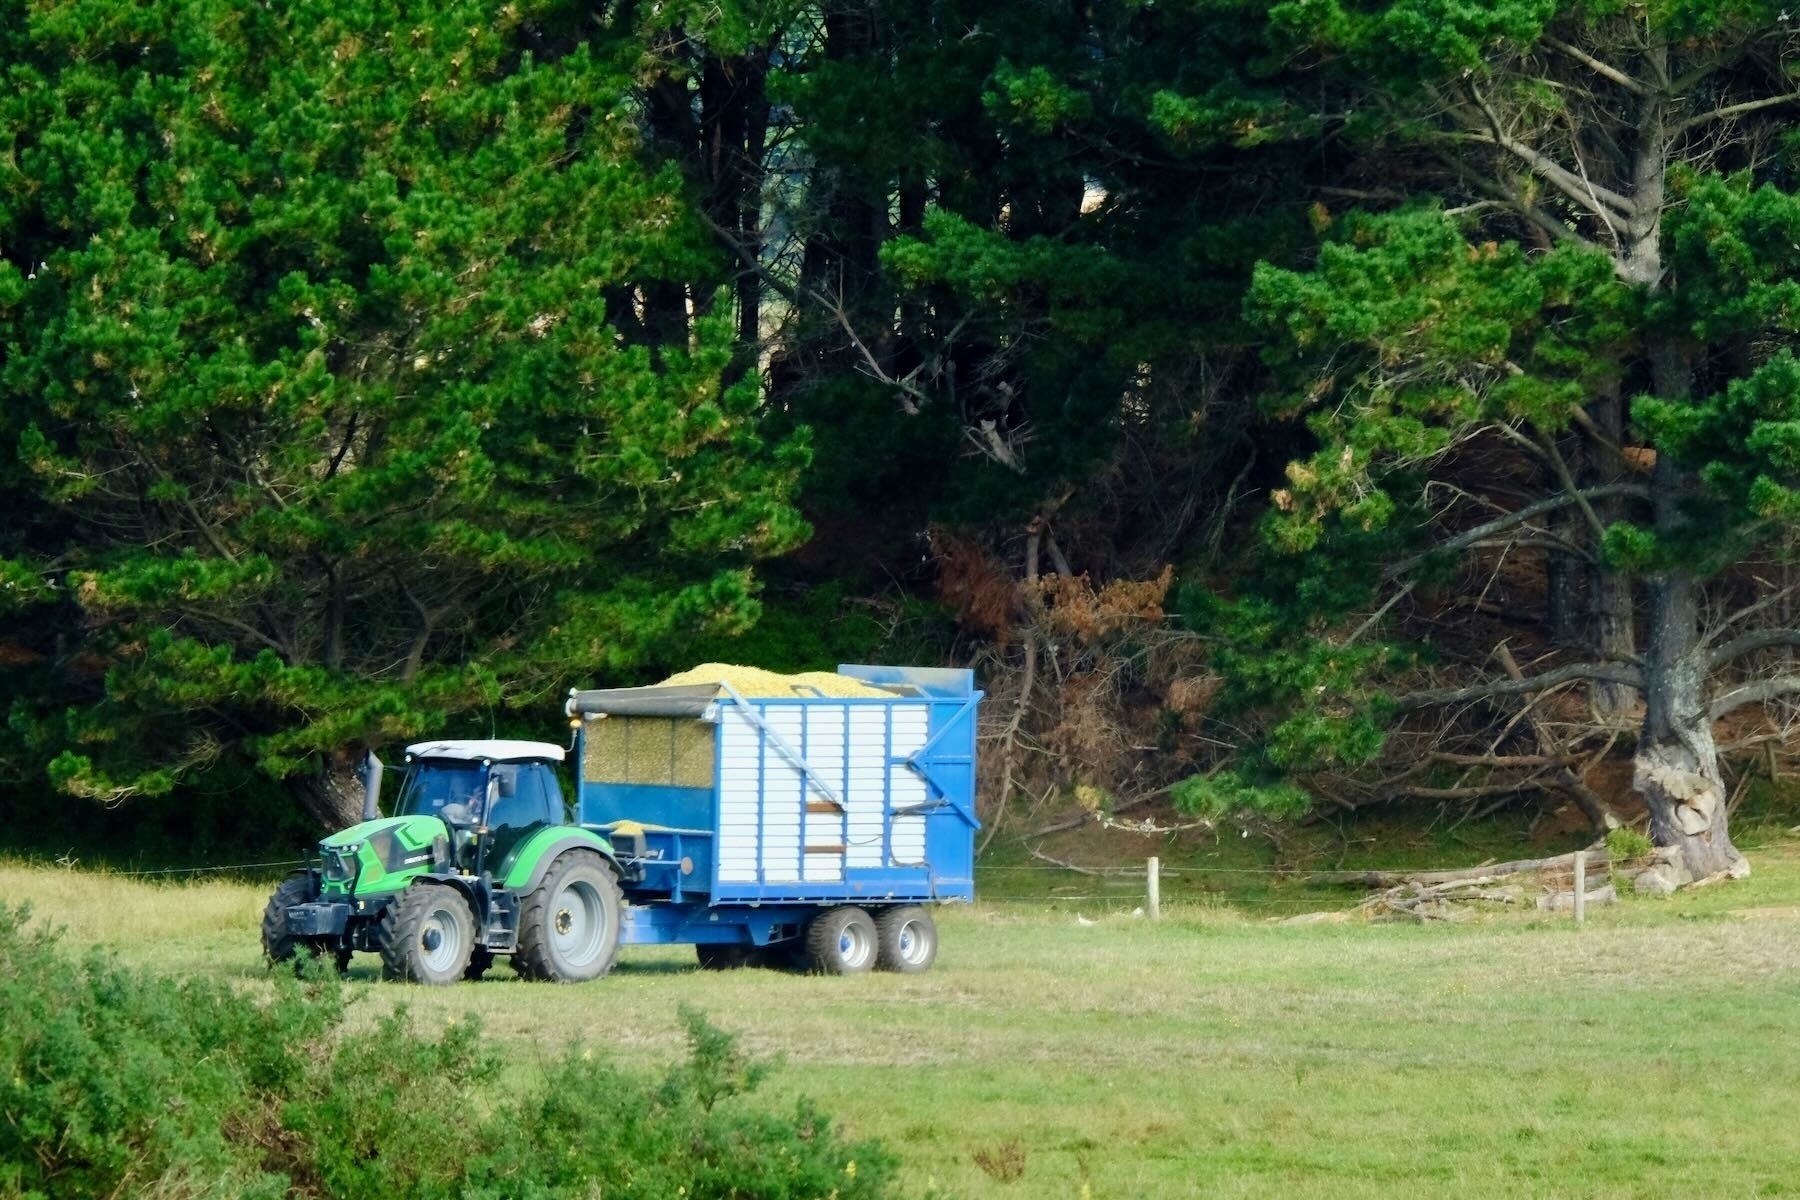 Tractor towing away a full trailer.  